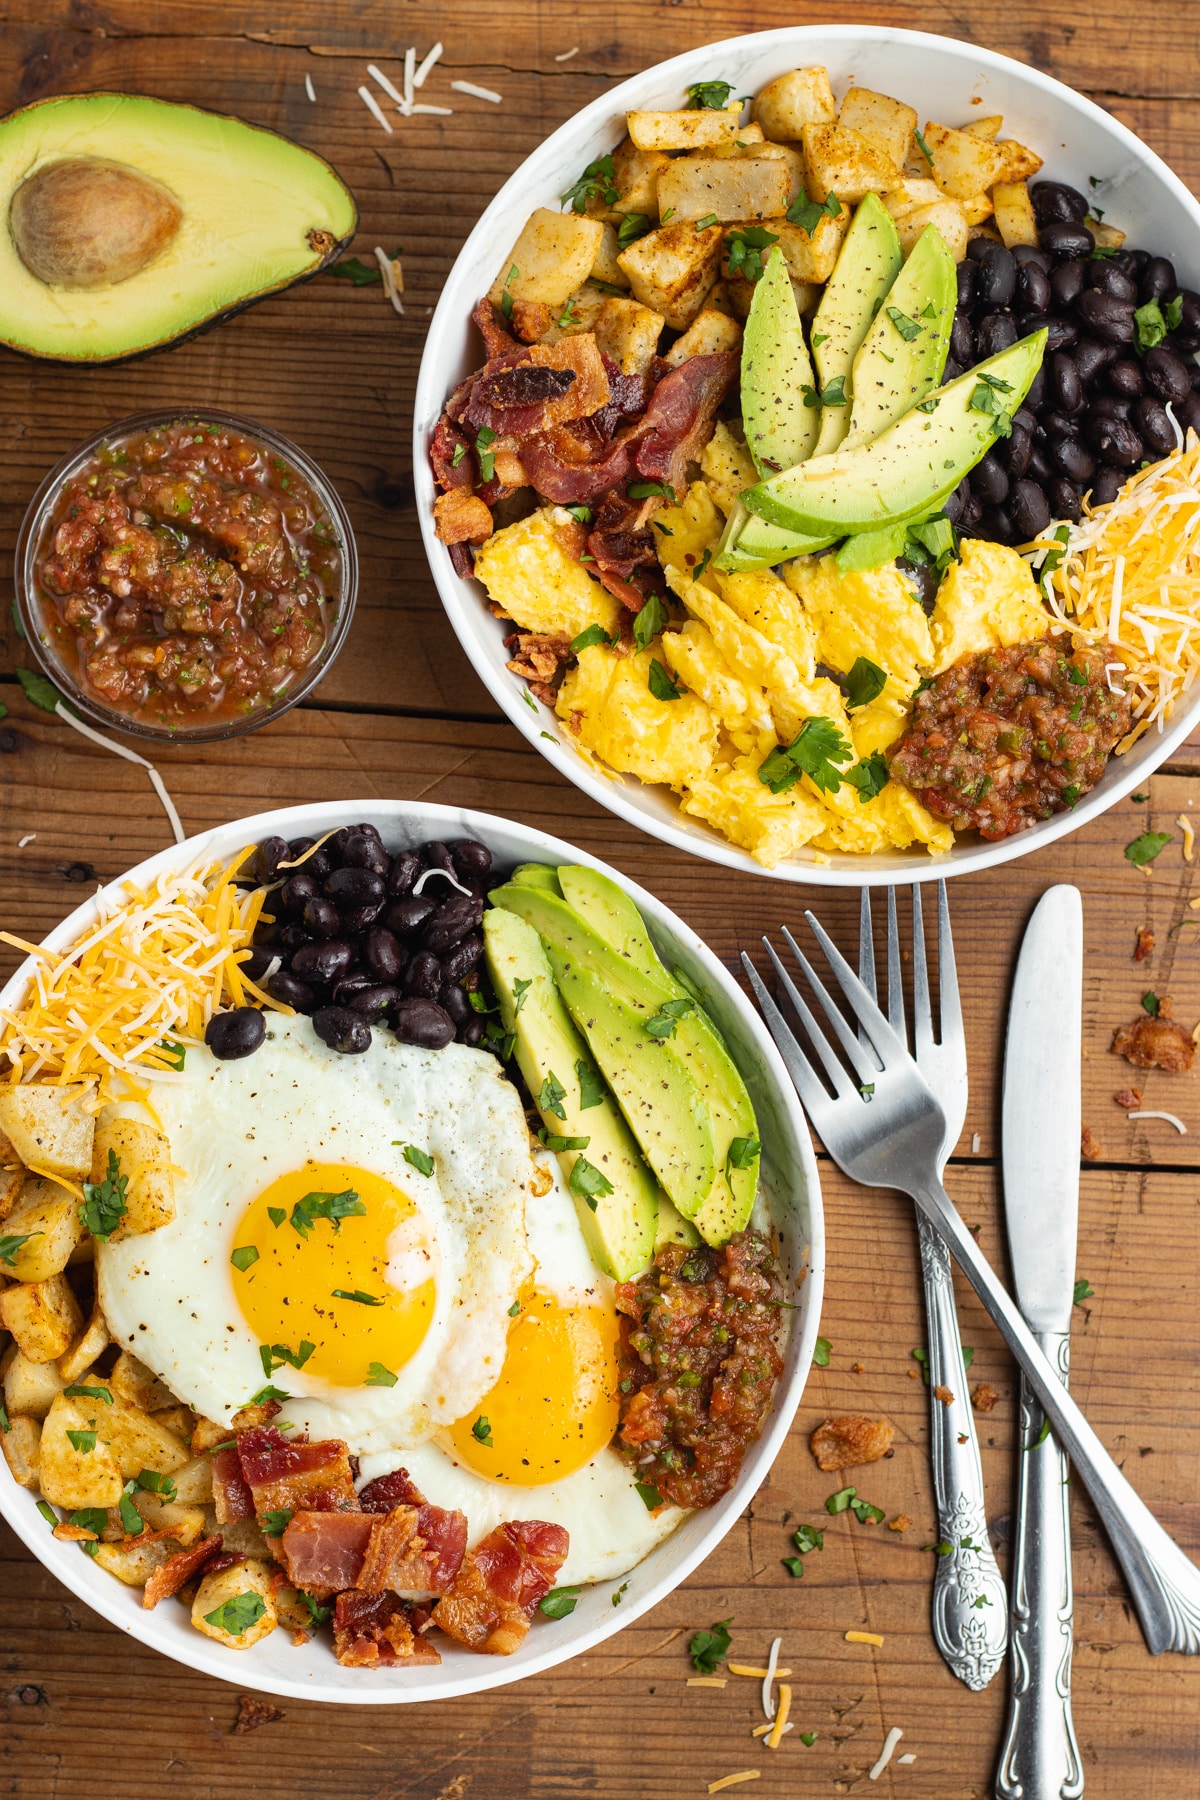 This is a picture of two filled burrito breakfast bowls.